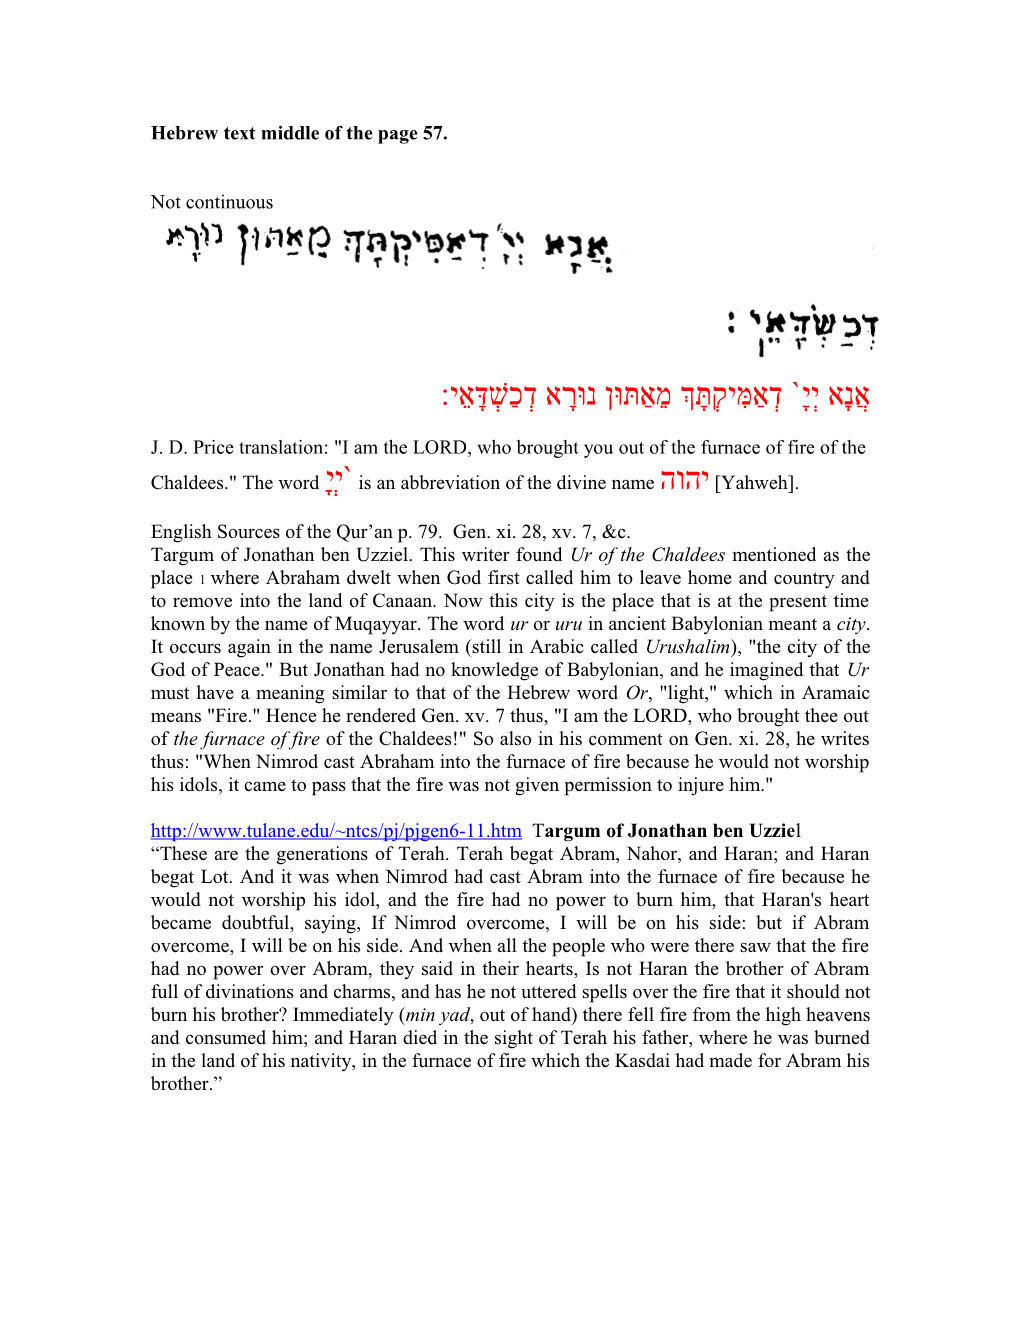 Hebrew Text Middle of the Page 57